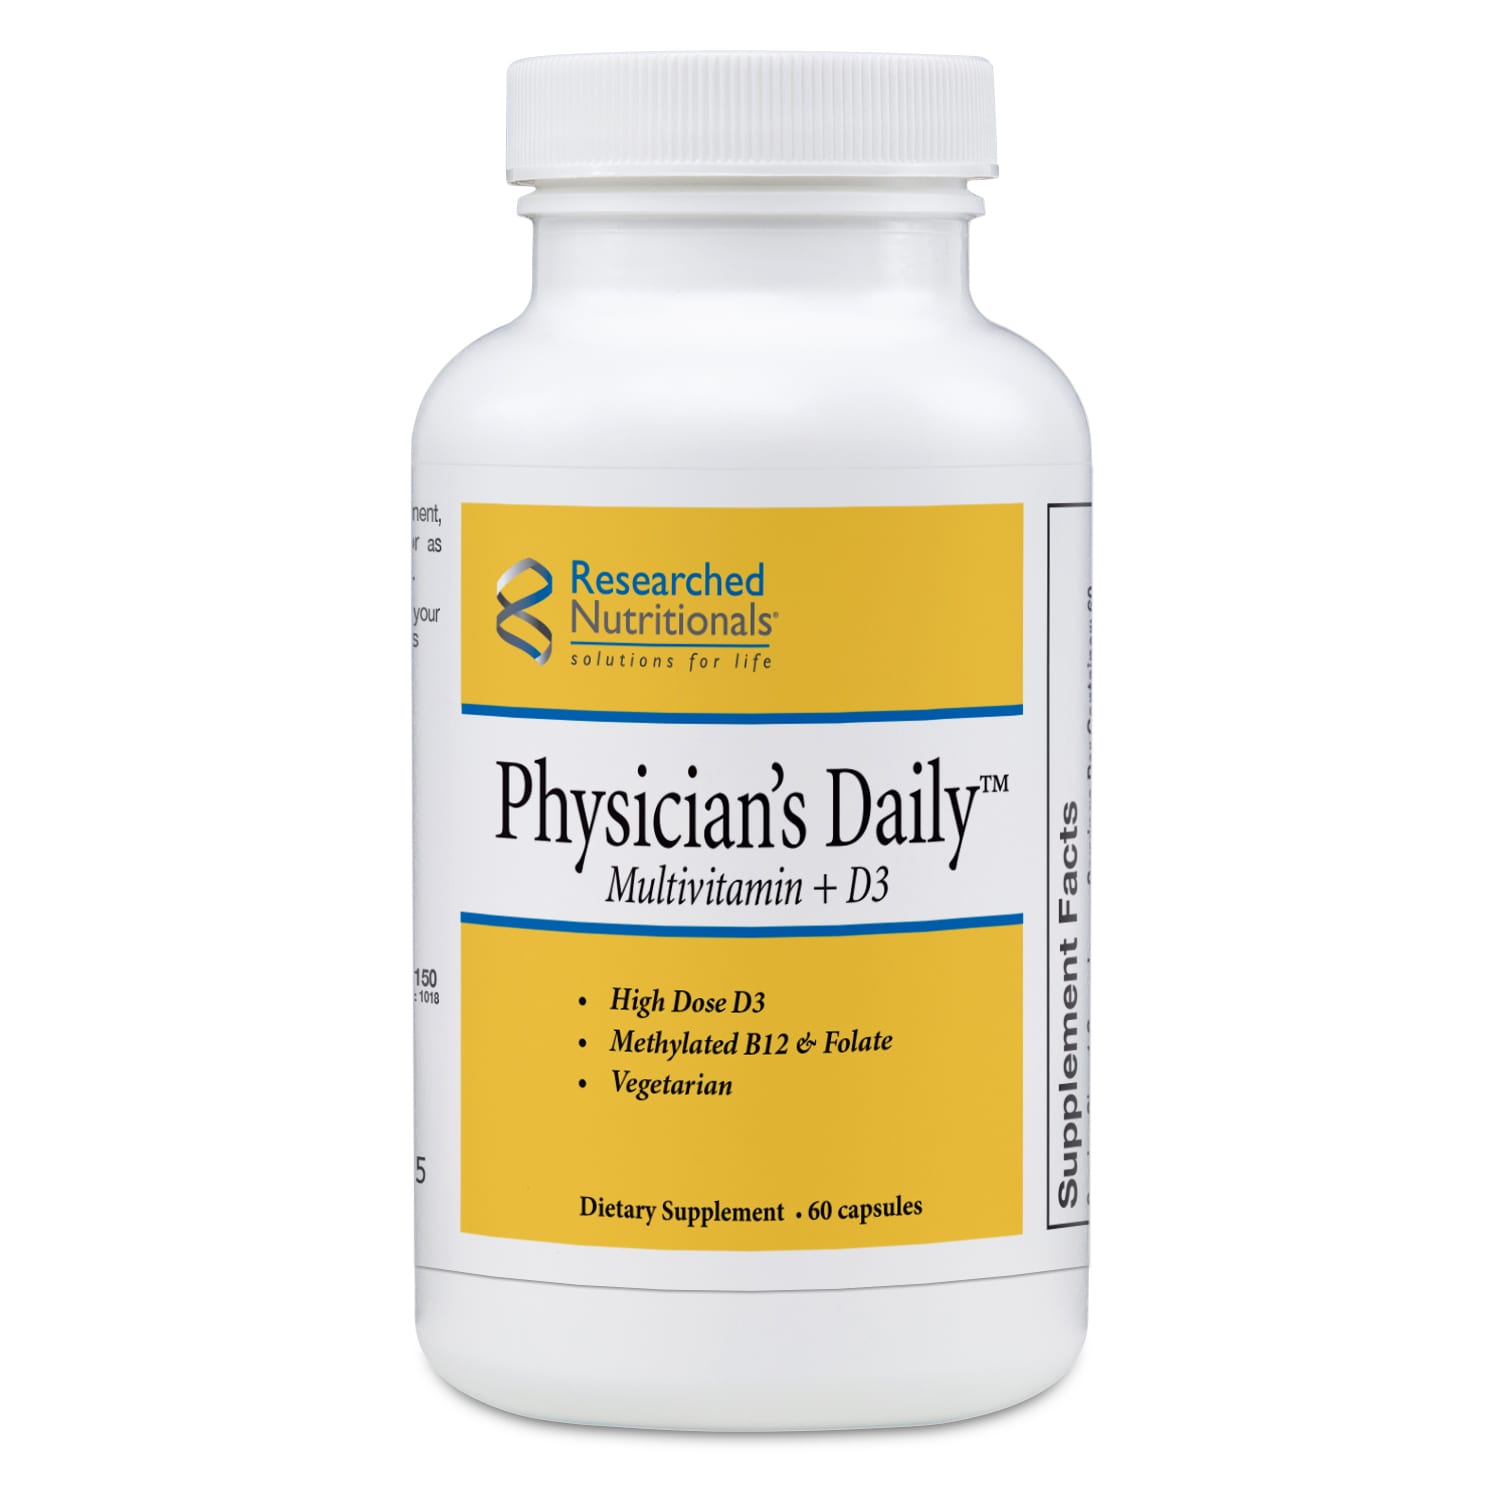 Physician's Daily Multivitamin + D3 60 caps